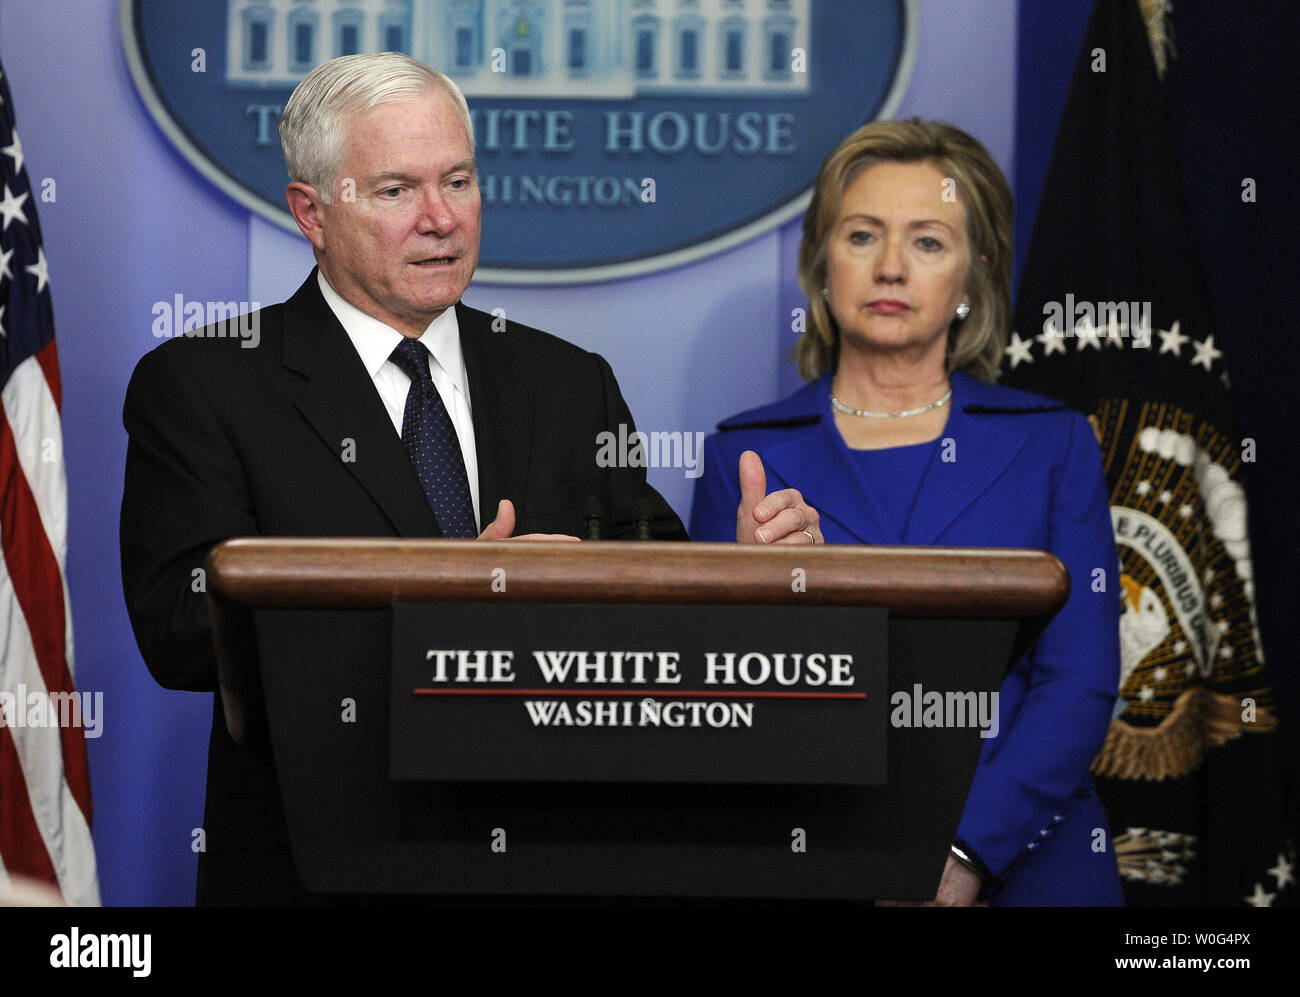 Secretary of Defense Robert Gates discusses the Afghanistan-Pakistan Annual Review in the Brady Press Briefing Room of the White House Washington on December 16, 2010. With him is Secretary of State Hillary Rodham Clinton.     UPI/Roger L. Wollenberg Stock Photo